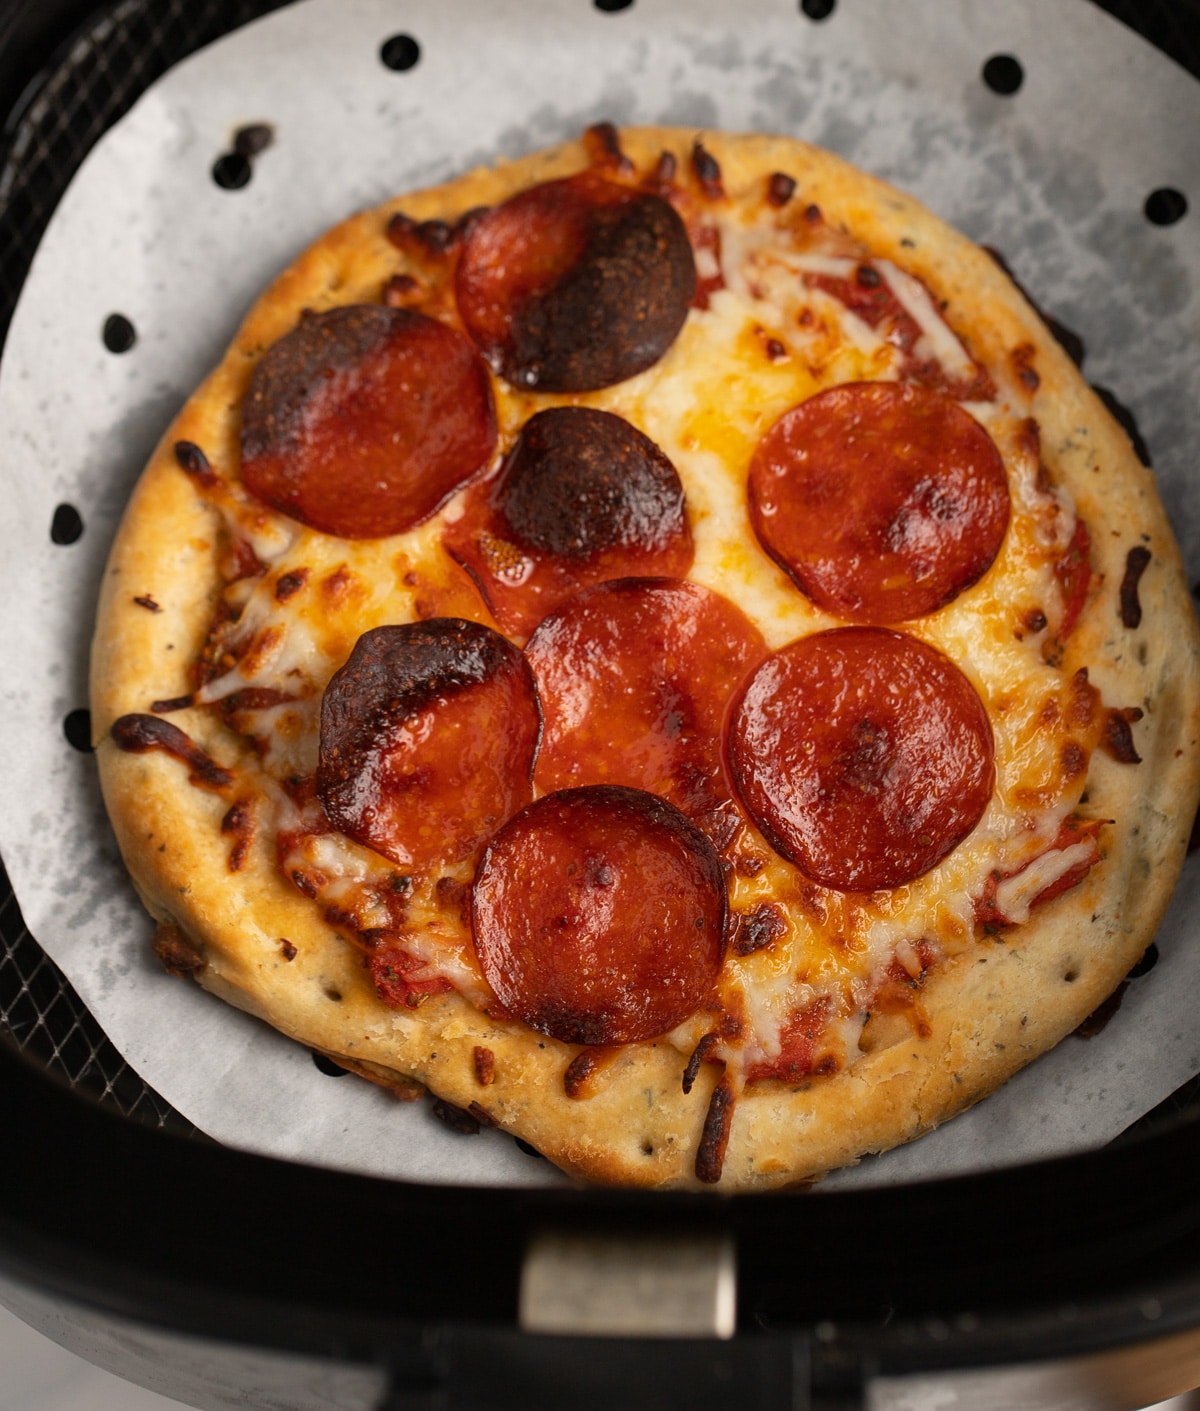 How to Cook a Frozen Pizza in an Air Fryer Oven 